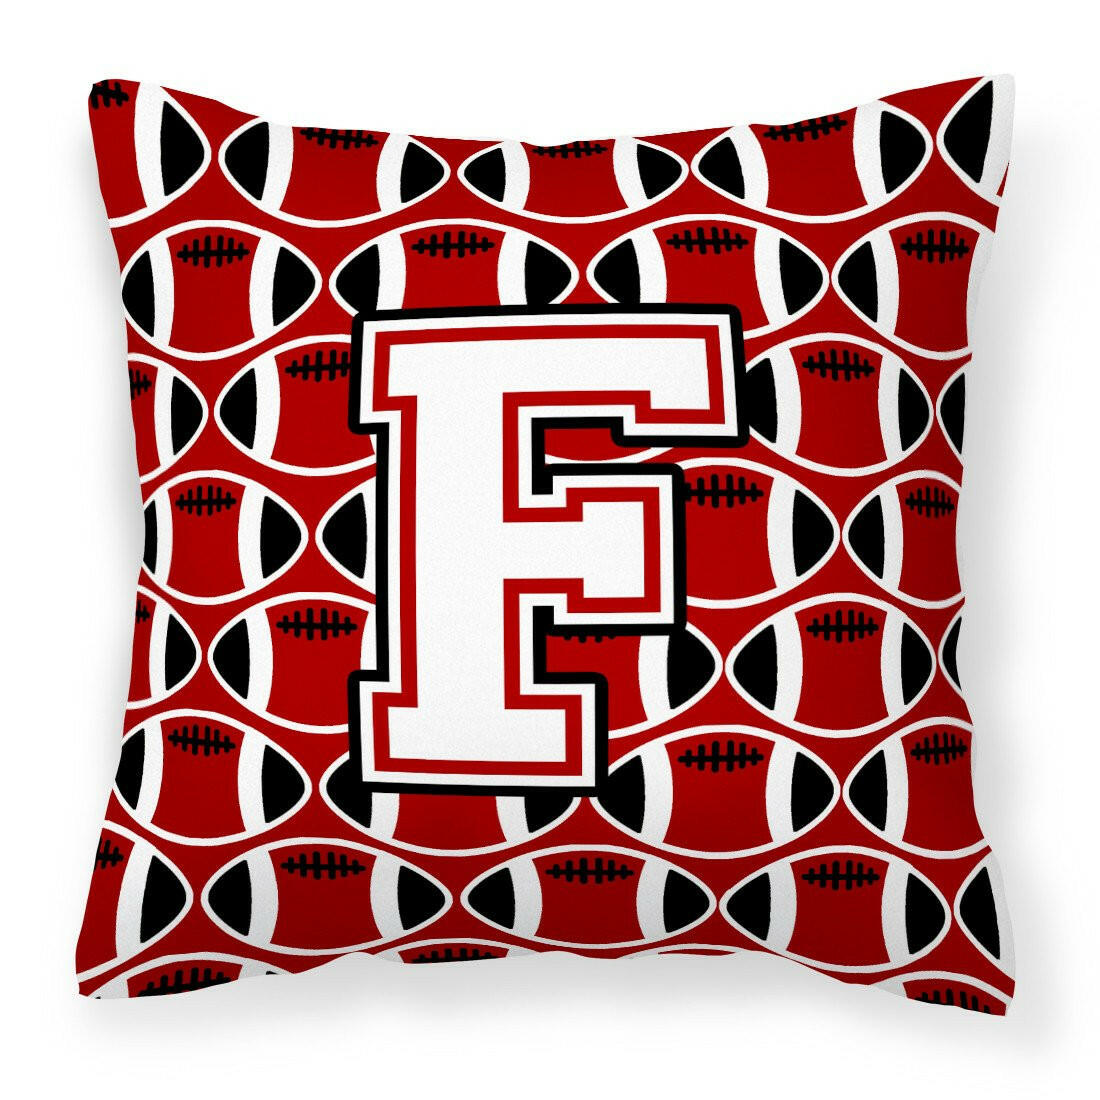 Letter F Football Cardinal and White Fabric Decorative Pillow CJ1082-FPW1414 by Caroline's Treasures